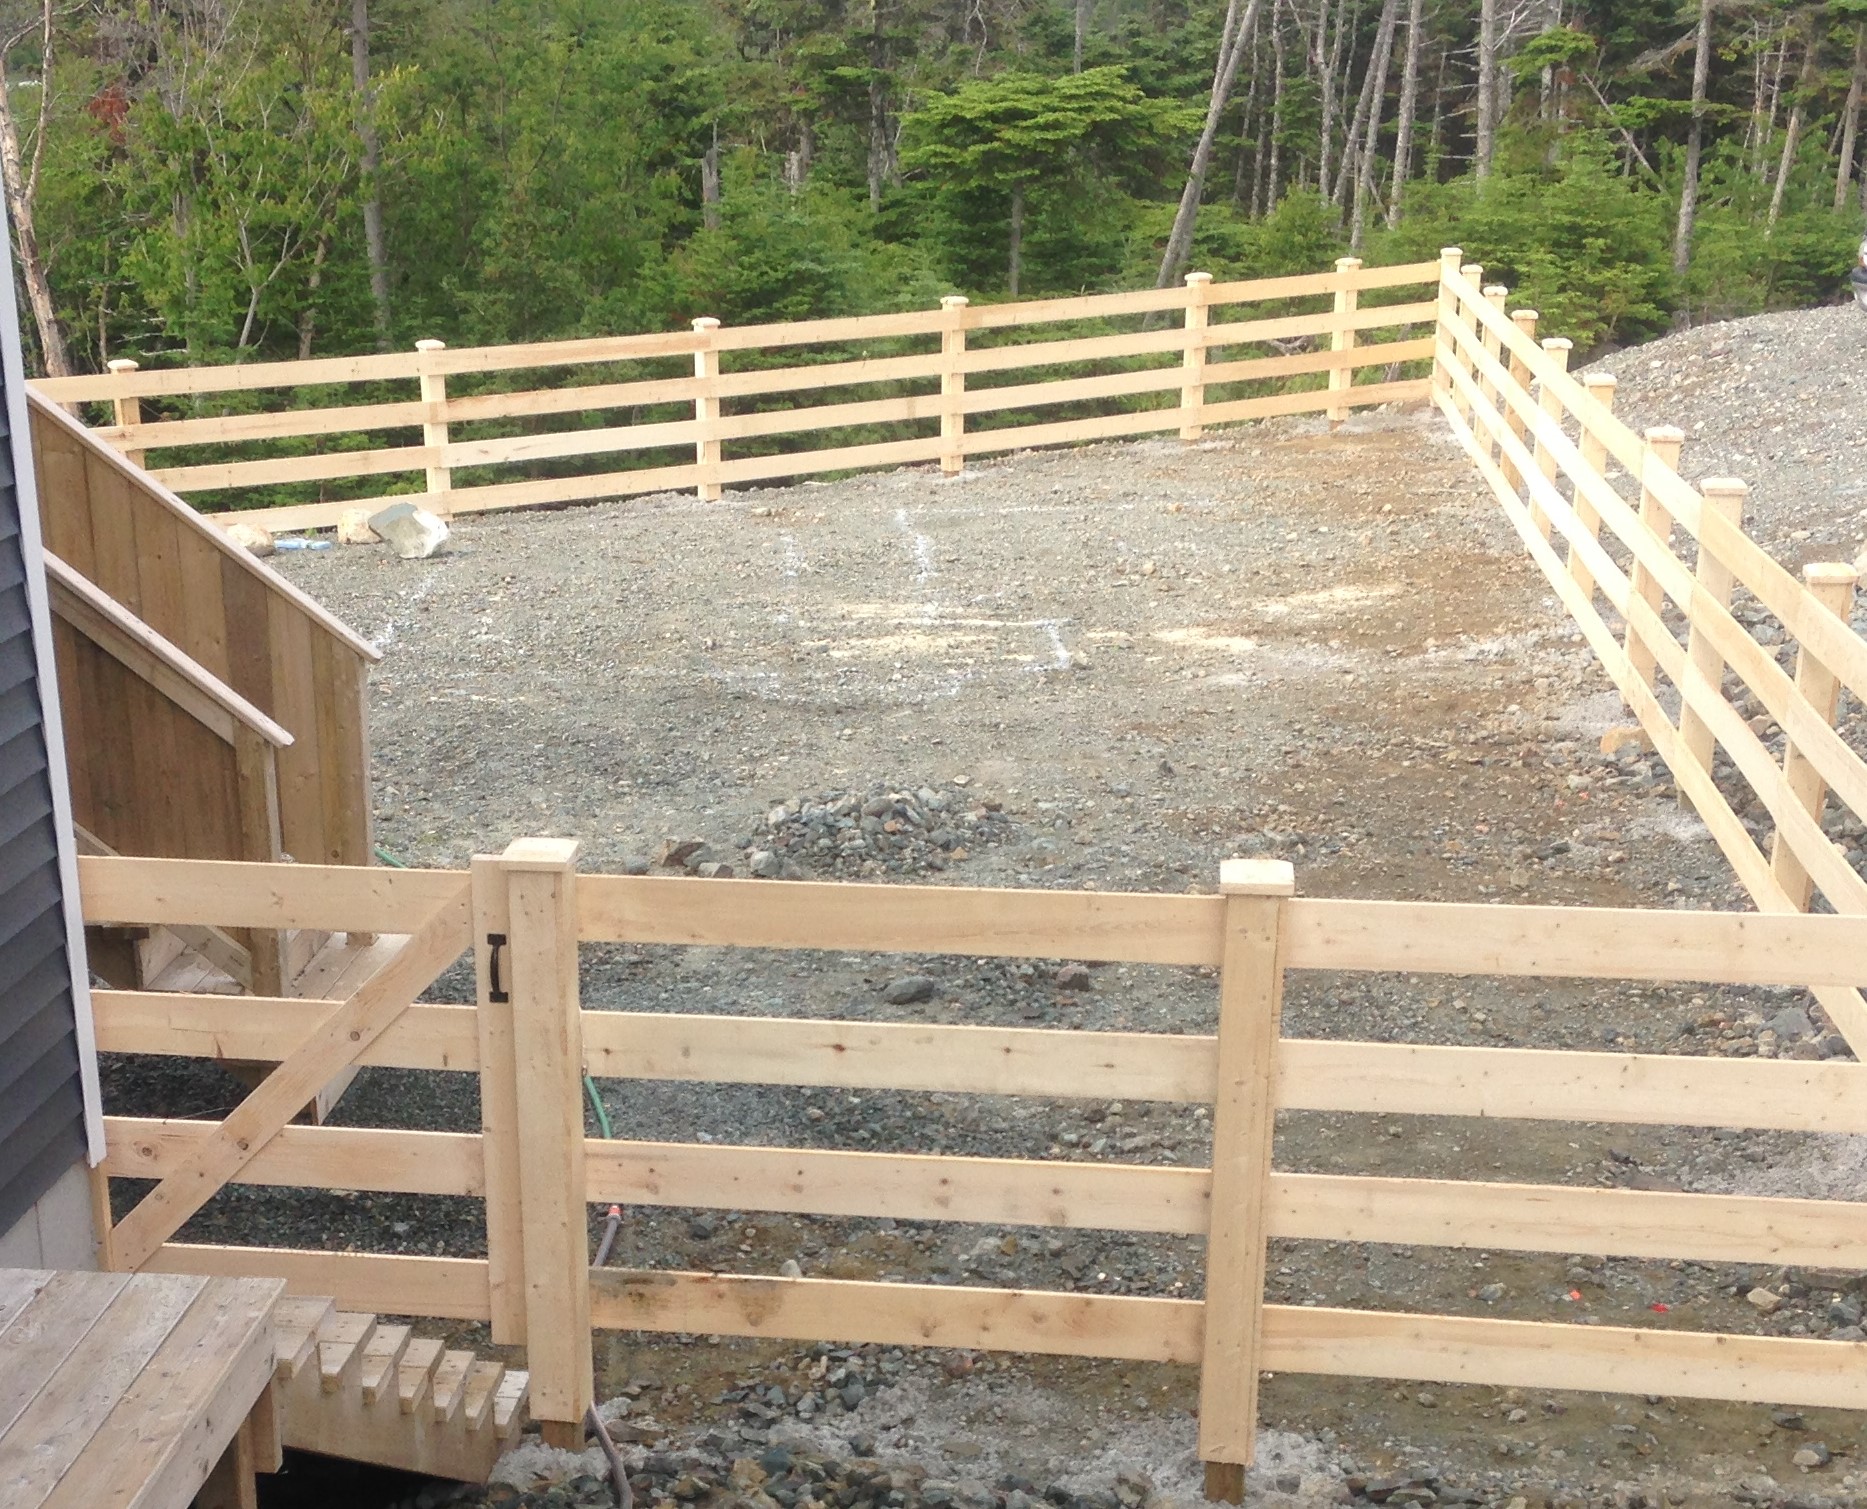 Pressure treated posts in concrete, clad with rough cut lumber and rough cut rails